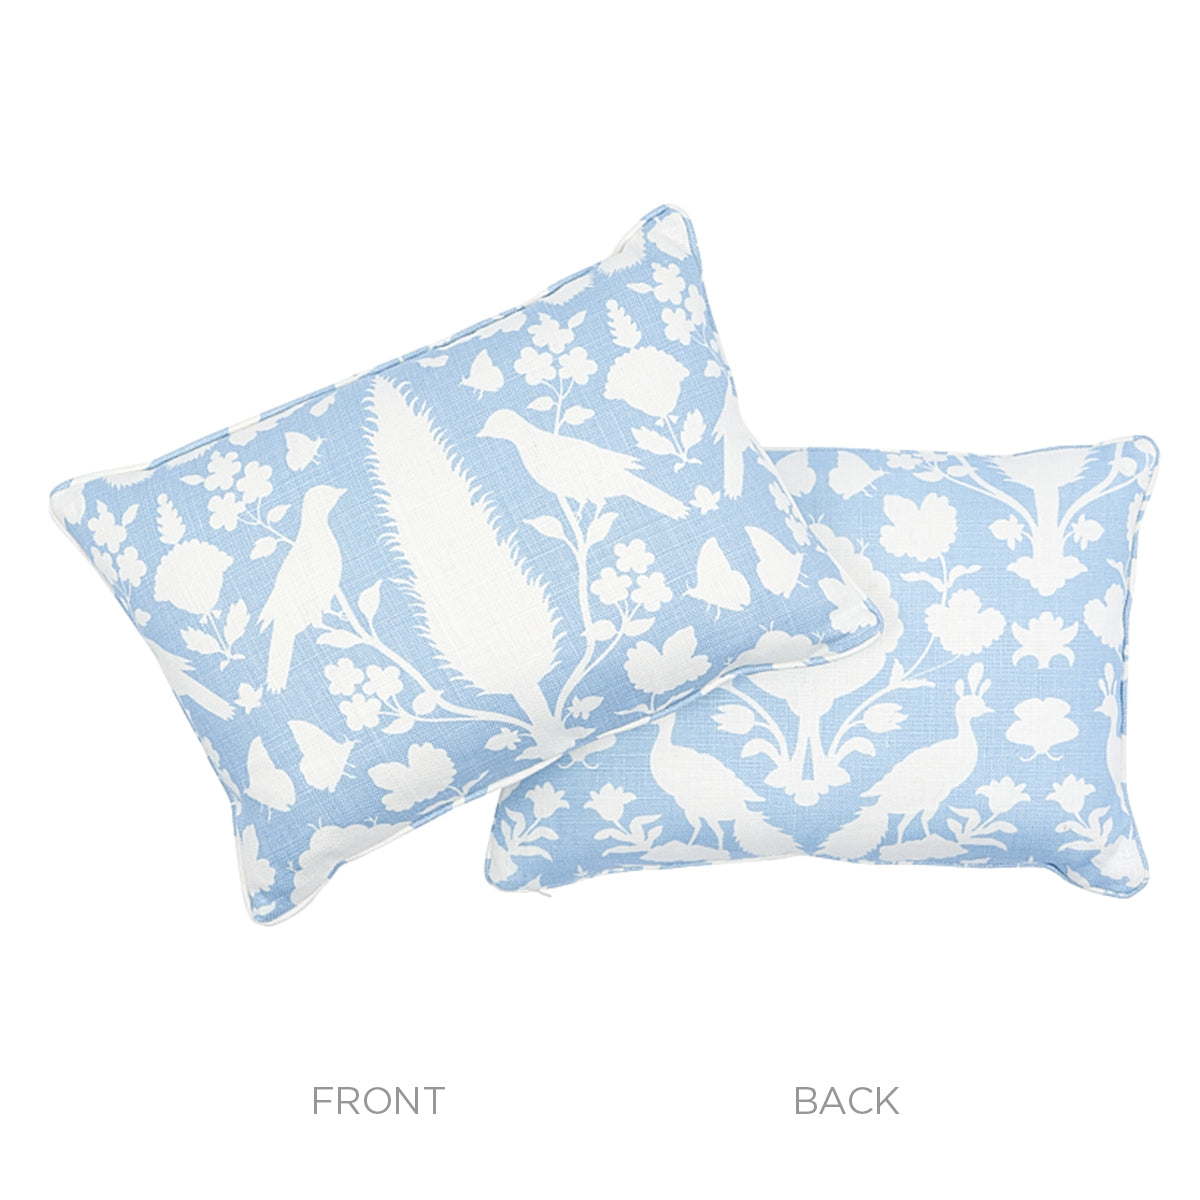 Chenonceau Pillow | Sky & White